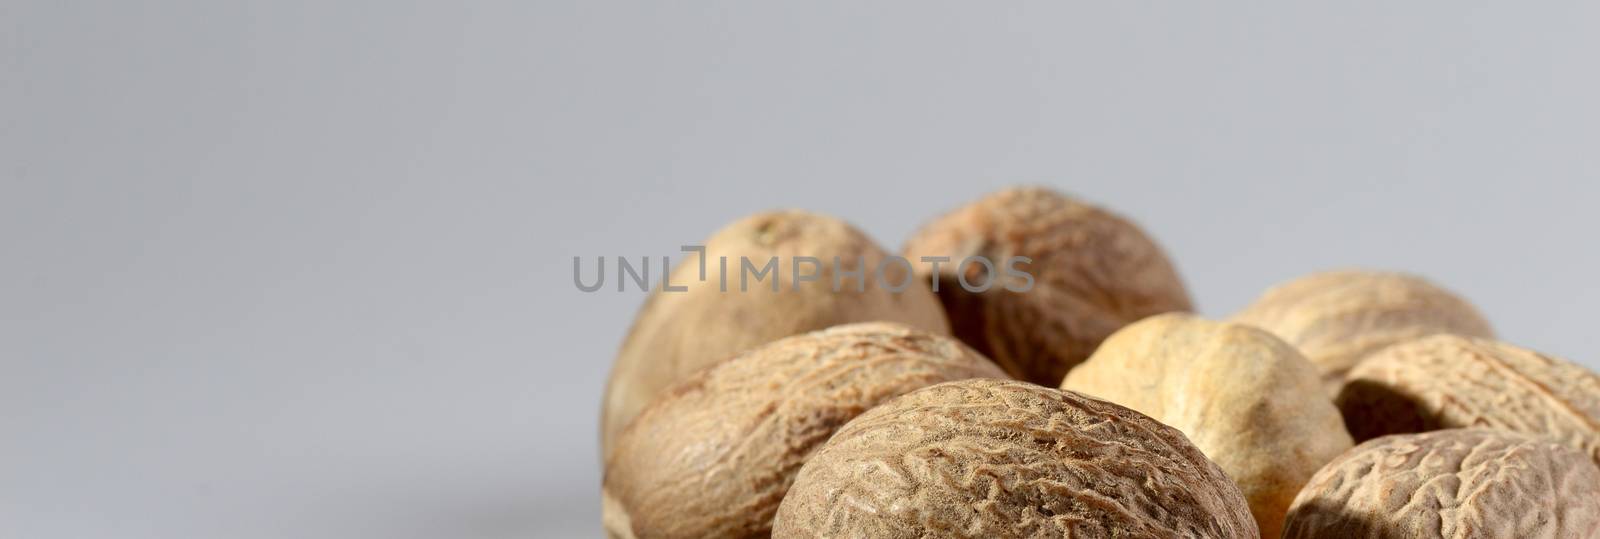 Close up of Nutmeg on a gray background